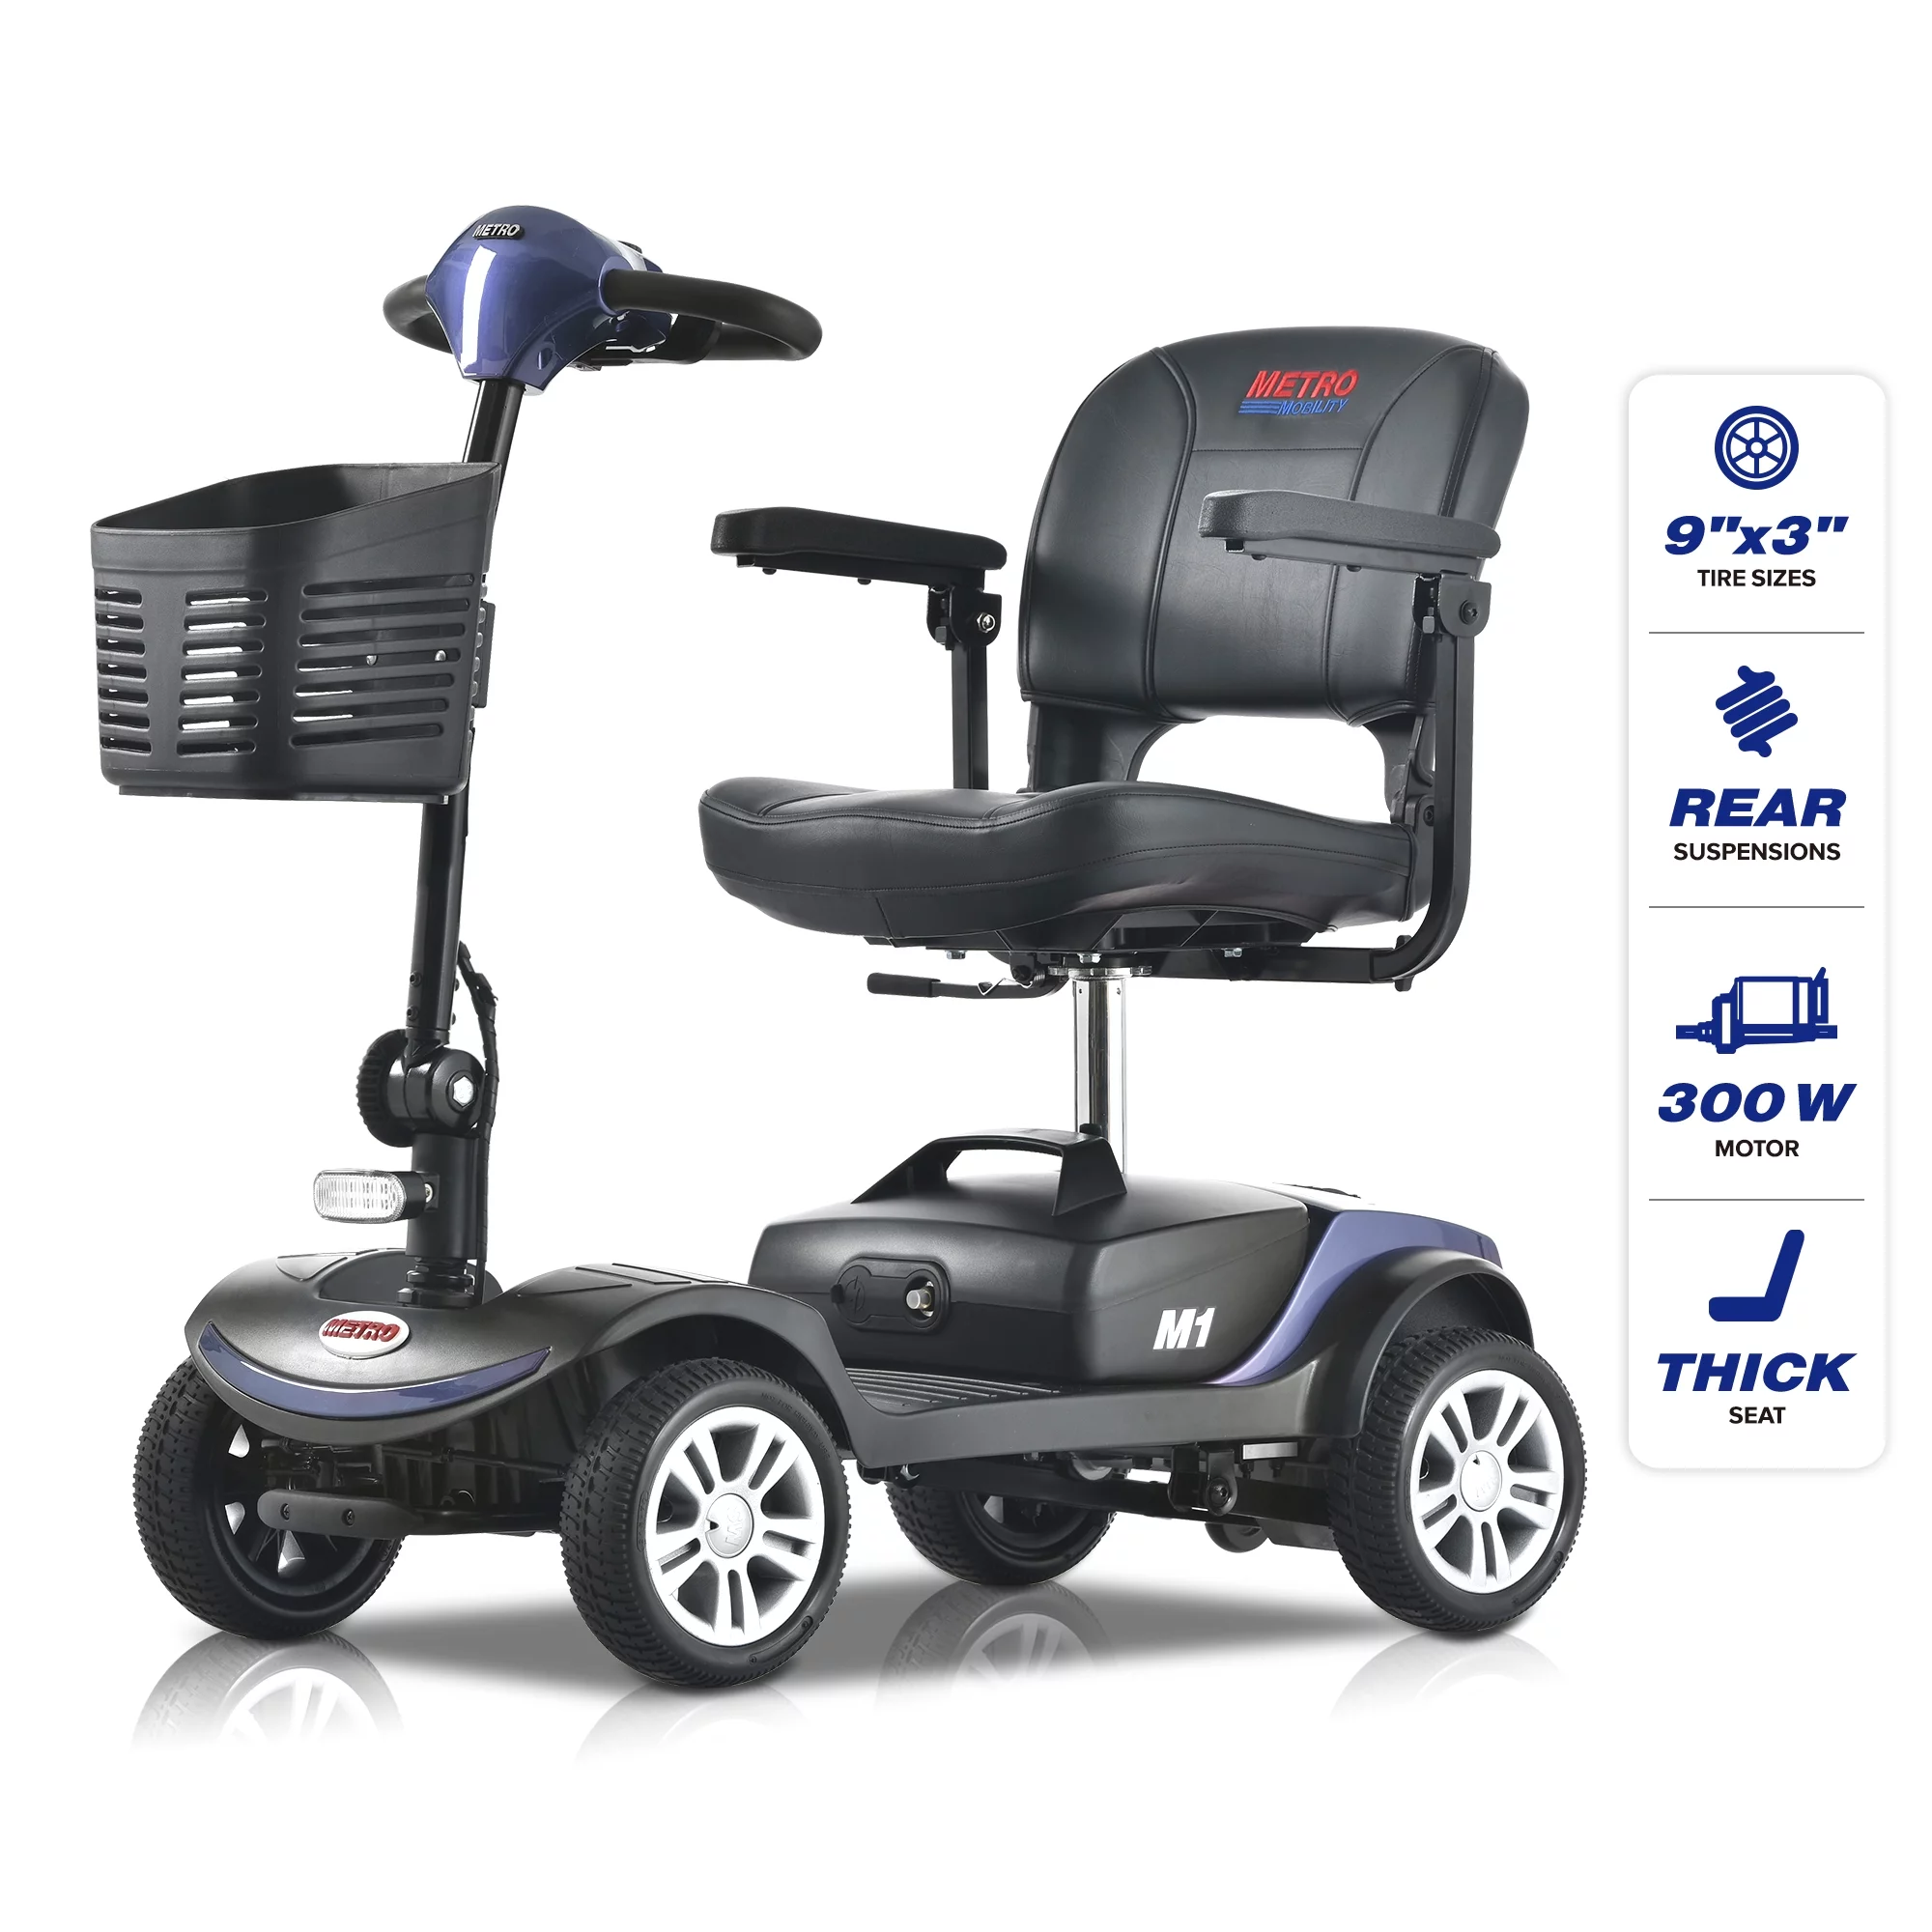 Segmart Mobility Scooter for Elderly, Durable Heavy Duty 4 Wheel Seniors Mobile Device with Lights, 300lbs, Blue